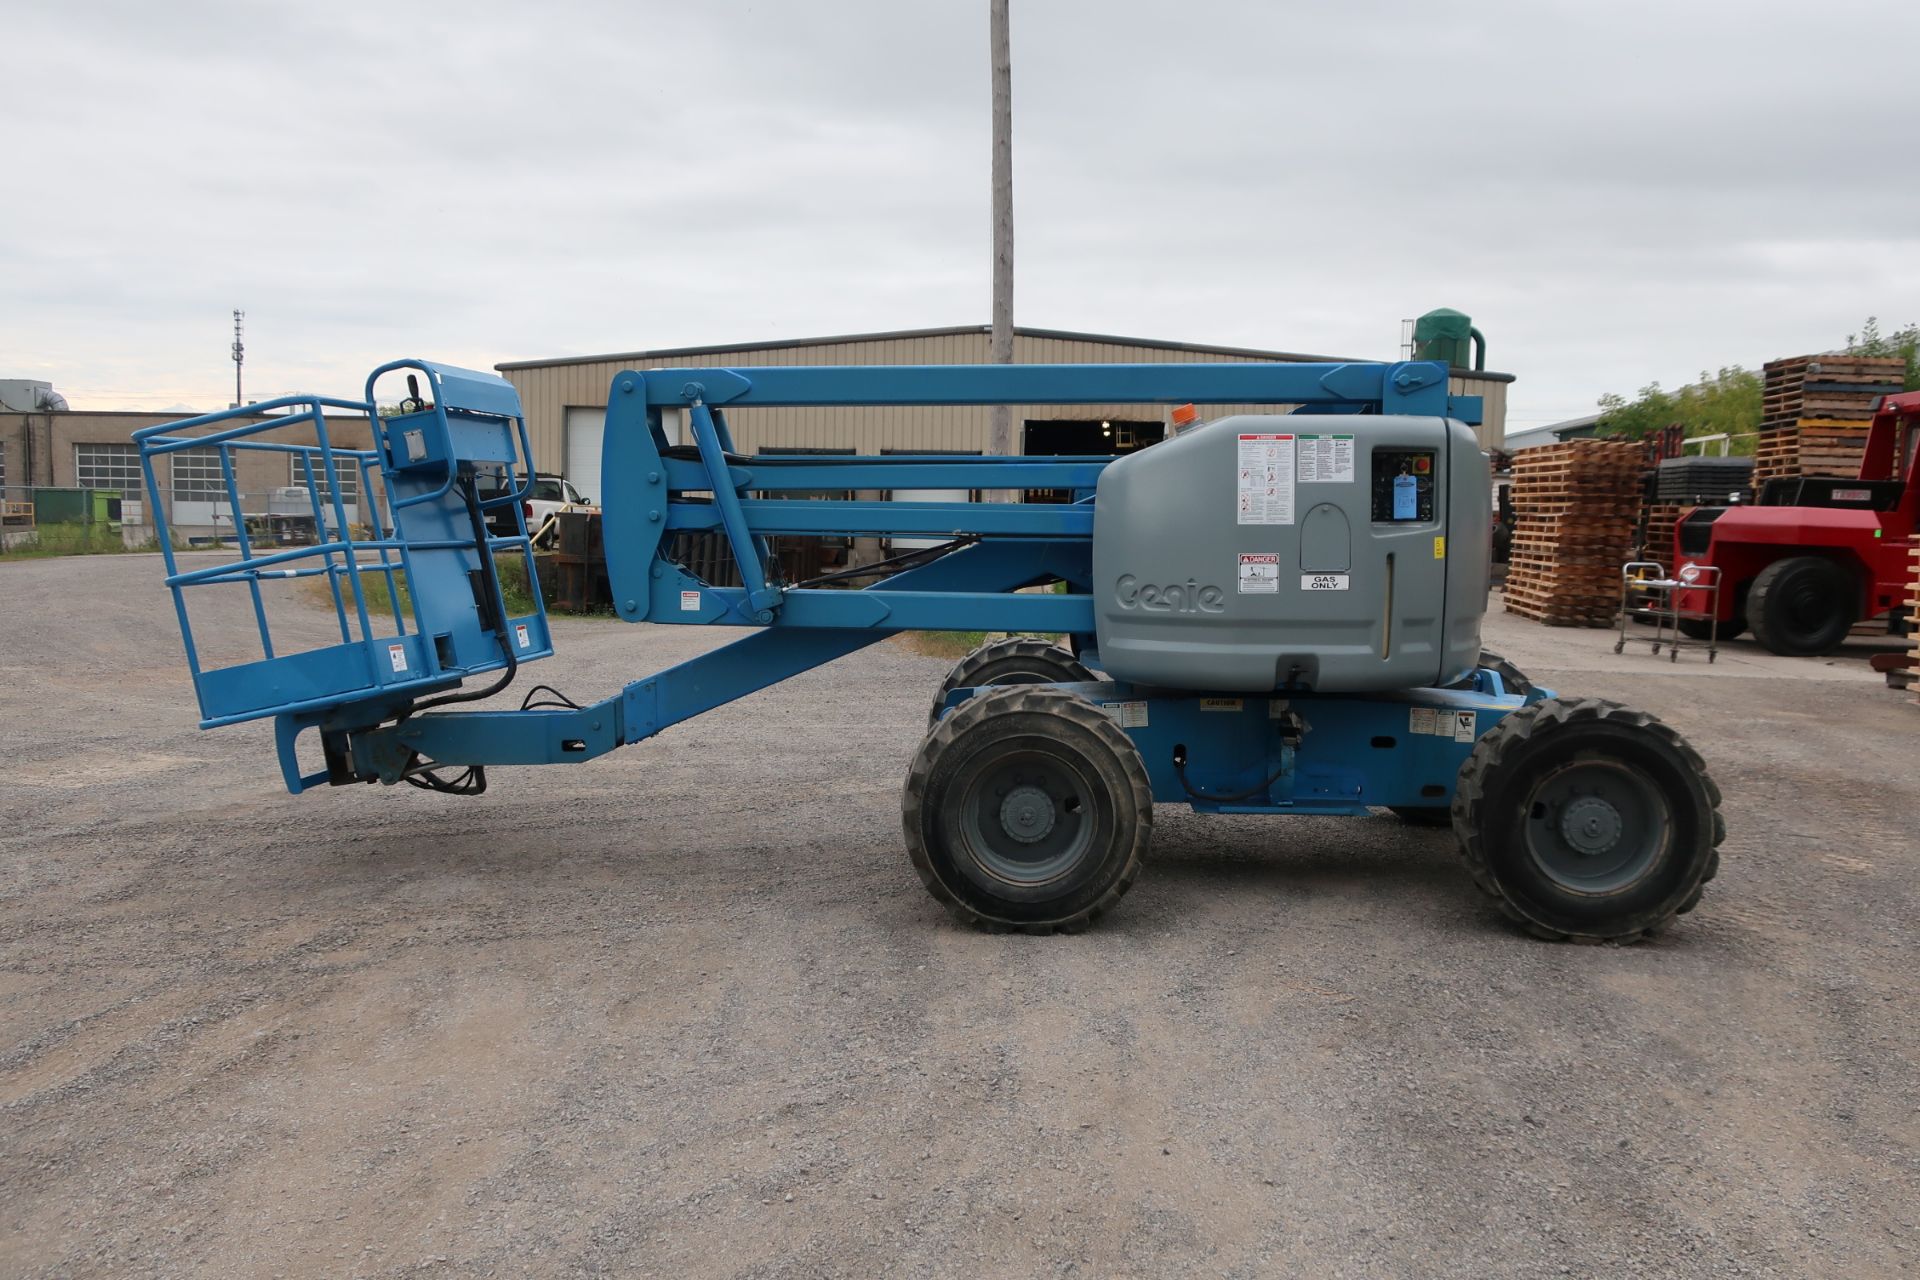 MINT Genie Zoom Boom 4x4 Articulating Lift model Z-45/25 45' height DIESEL UNIT LOW HOURS with non-